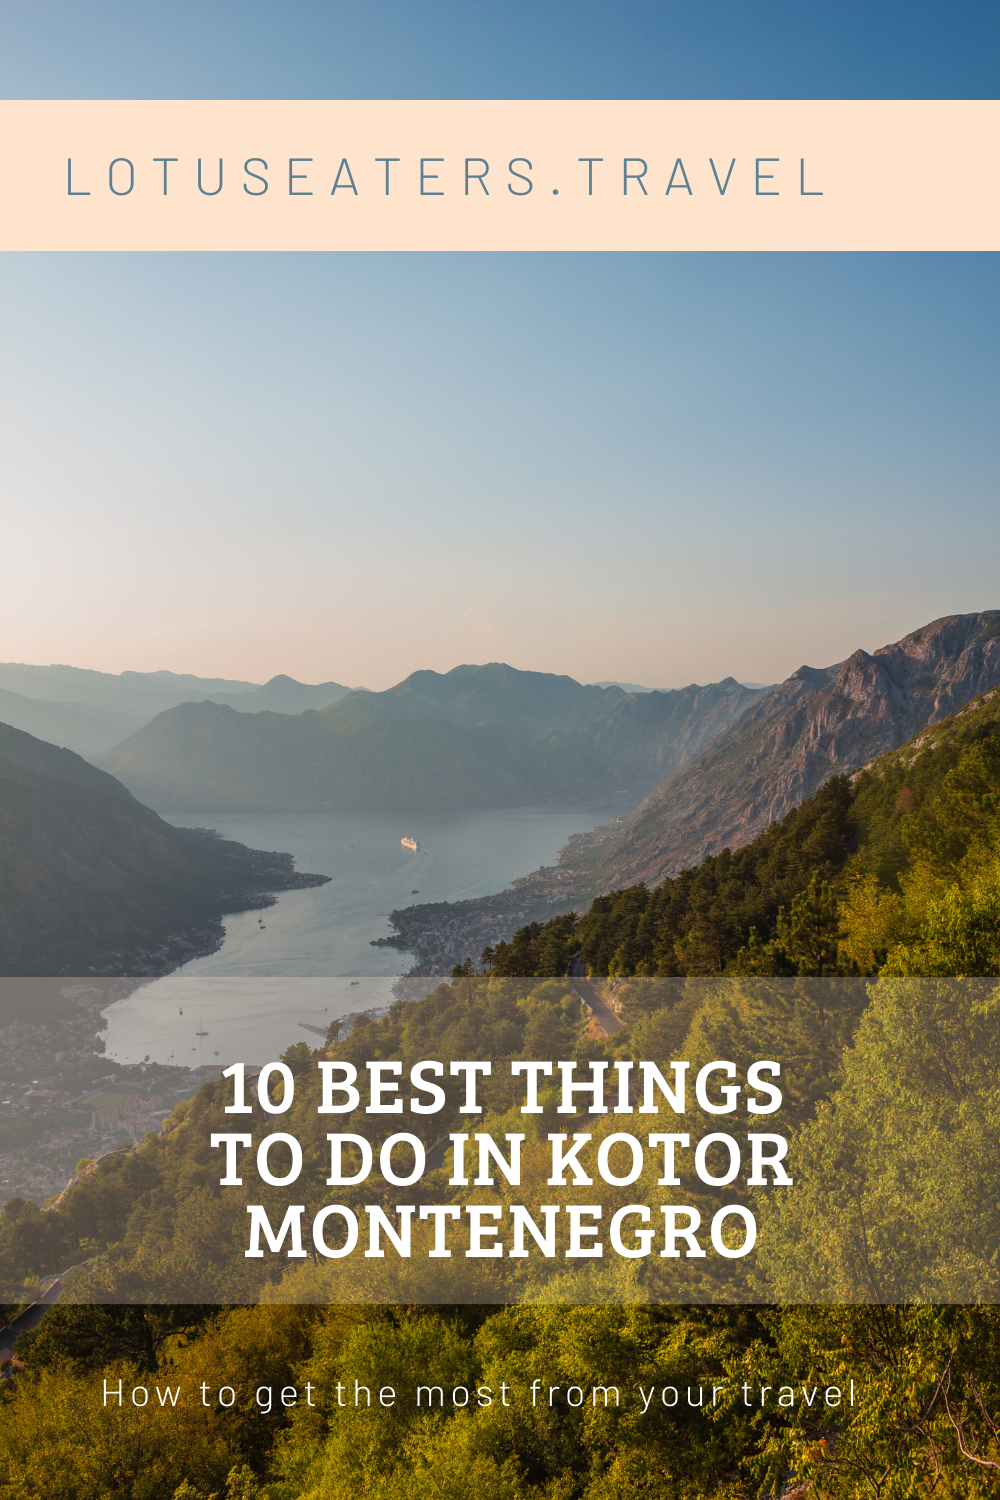 10 Best Things to Do in Kotor for a day